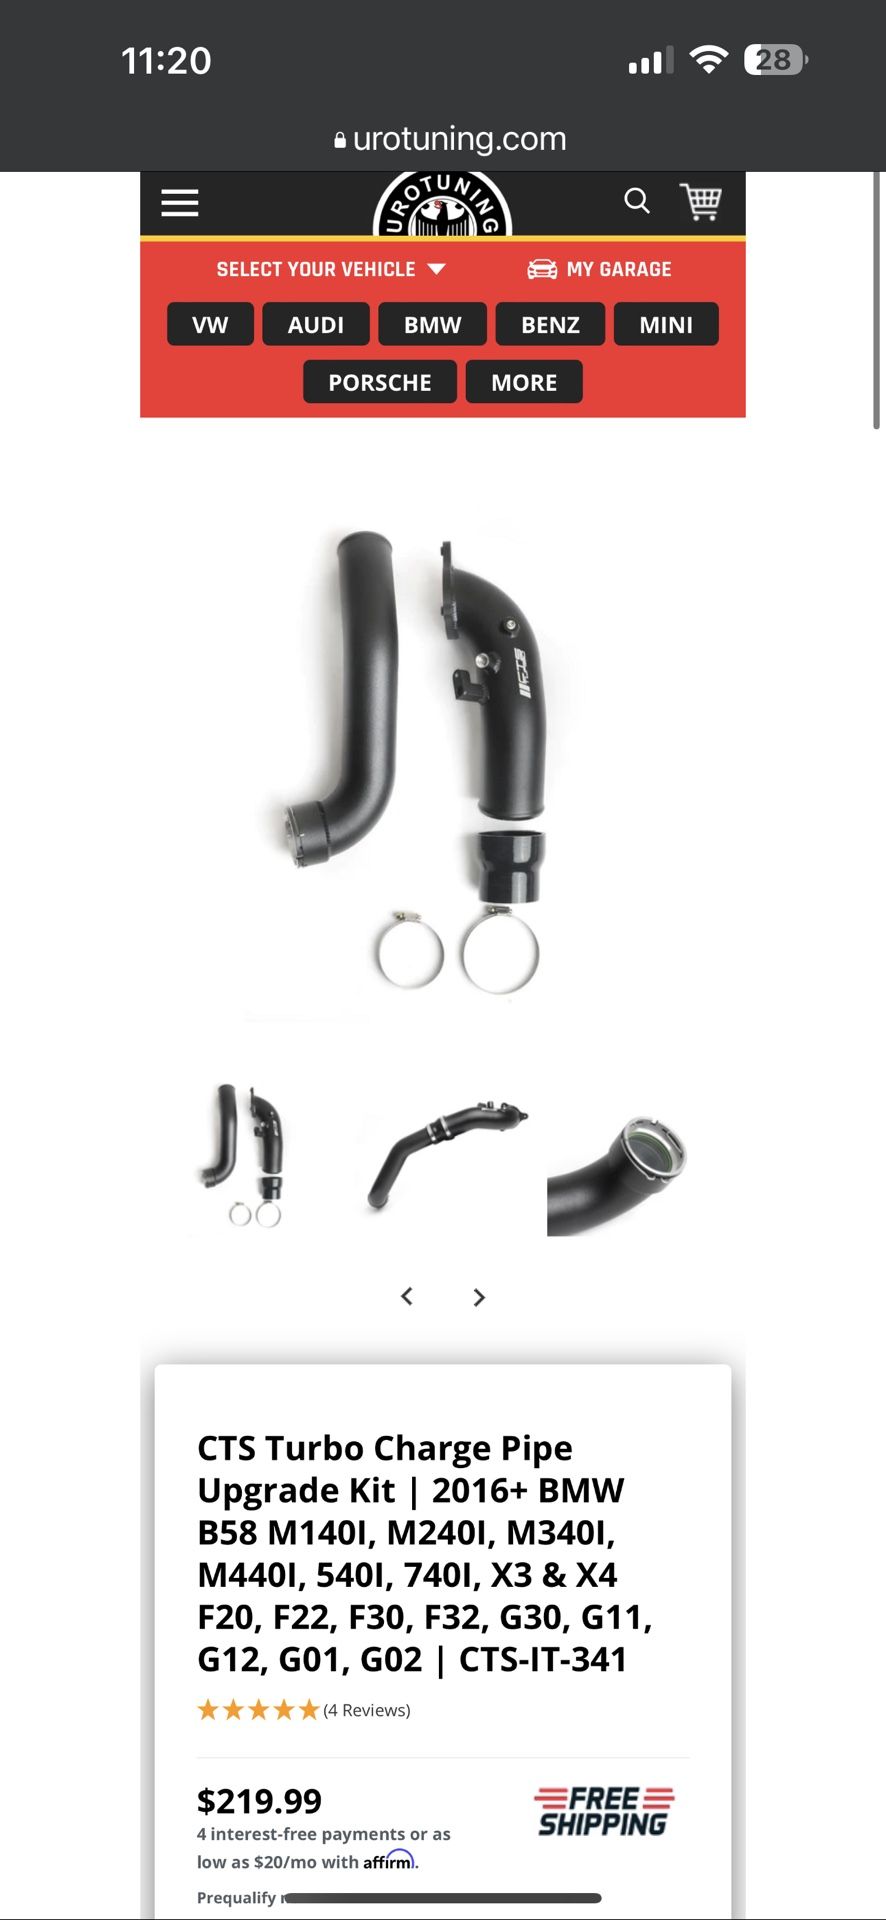 CTS Turbo Charge Pipe Upgrade Kit